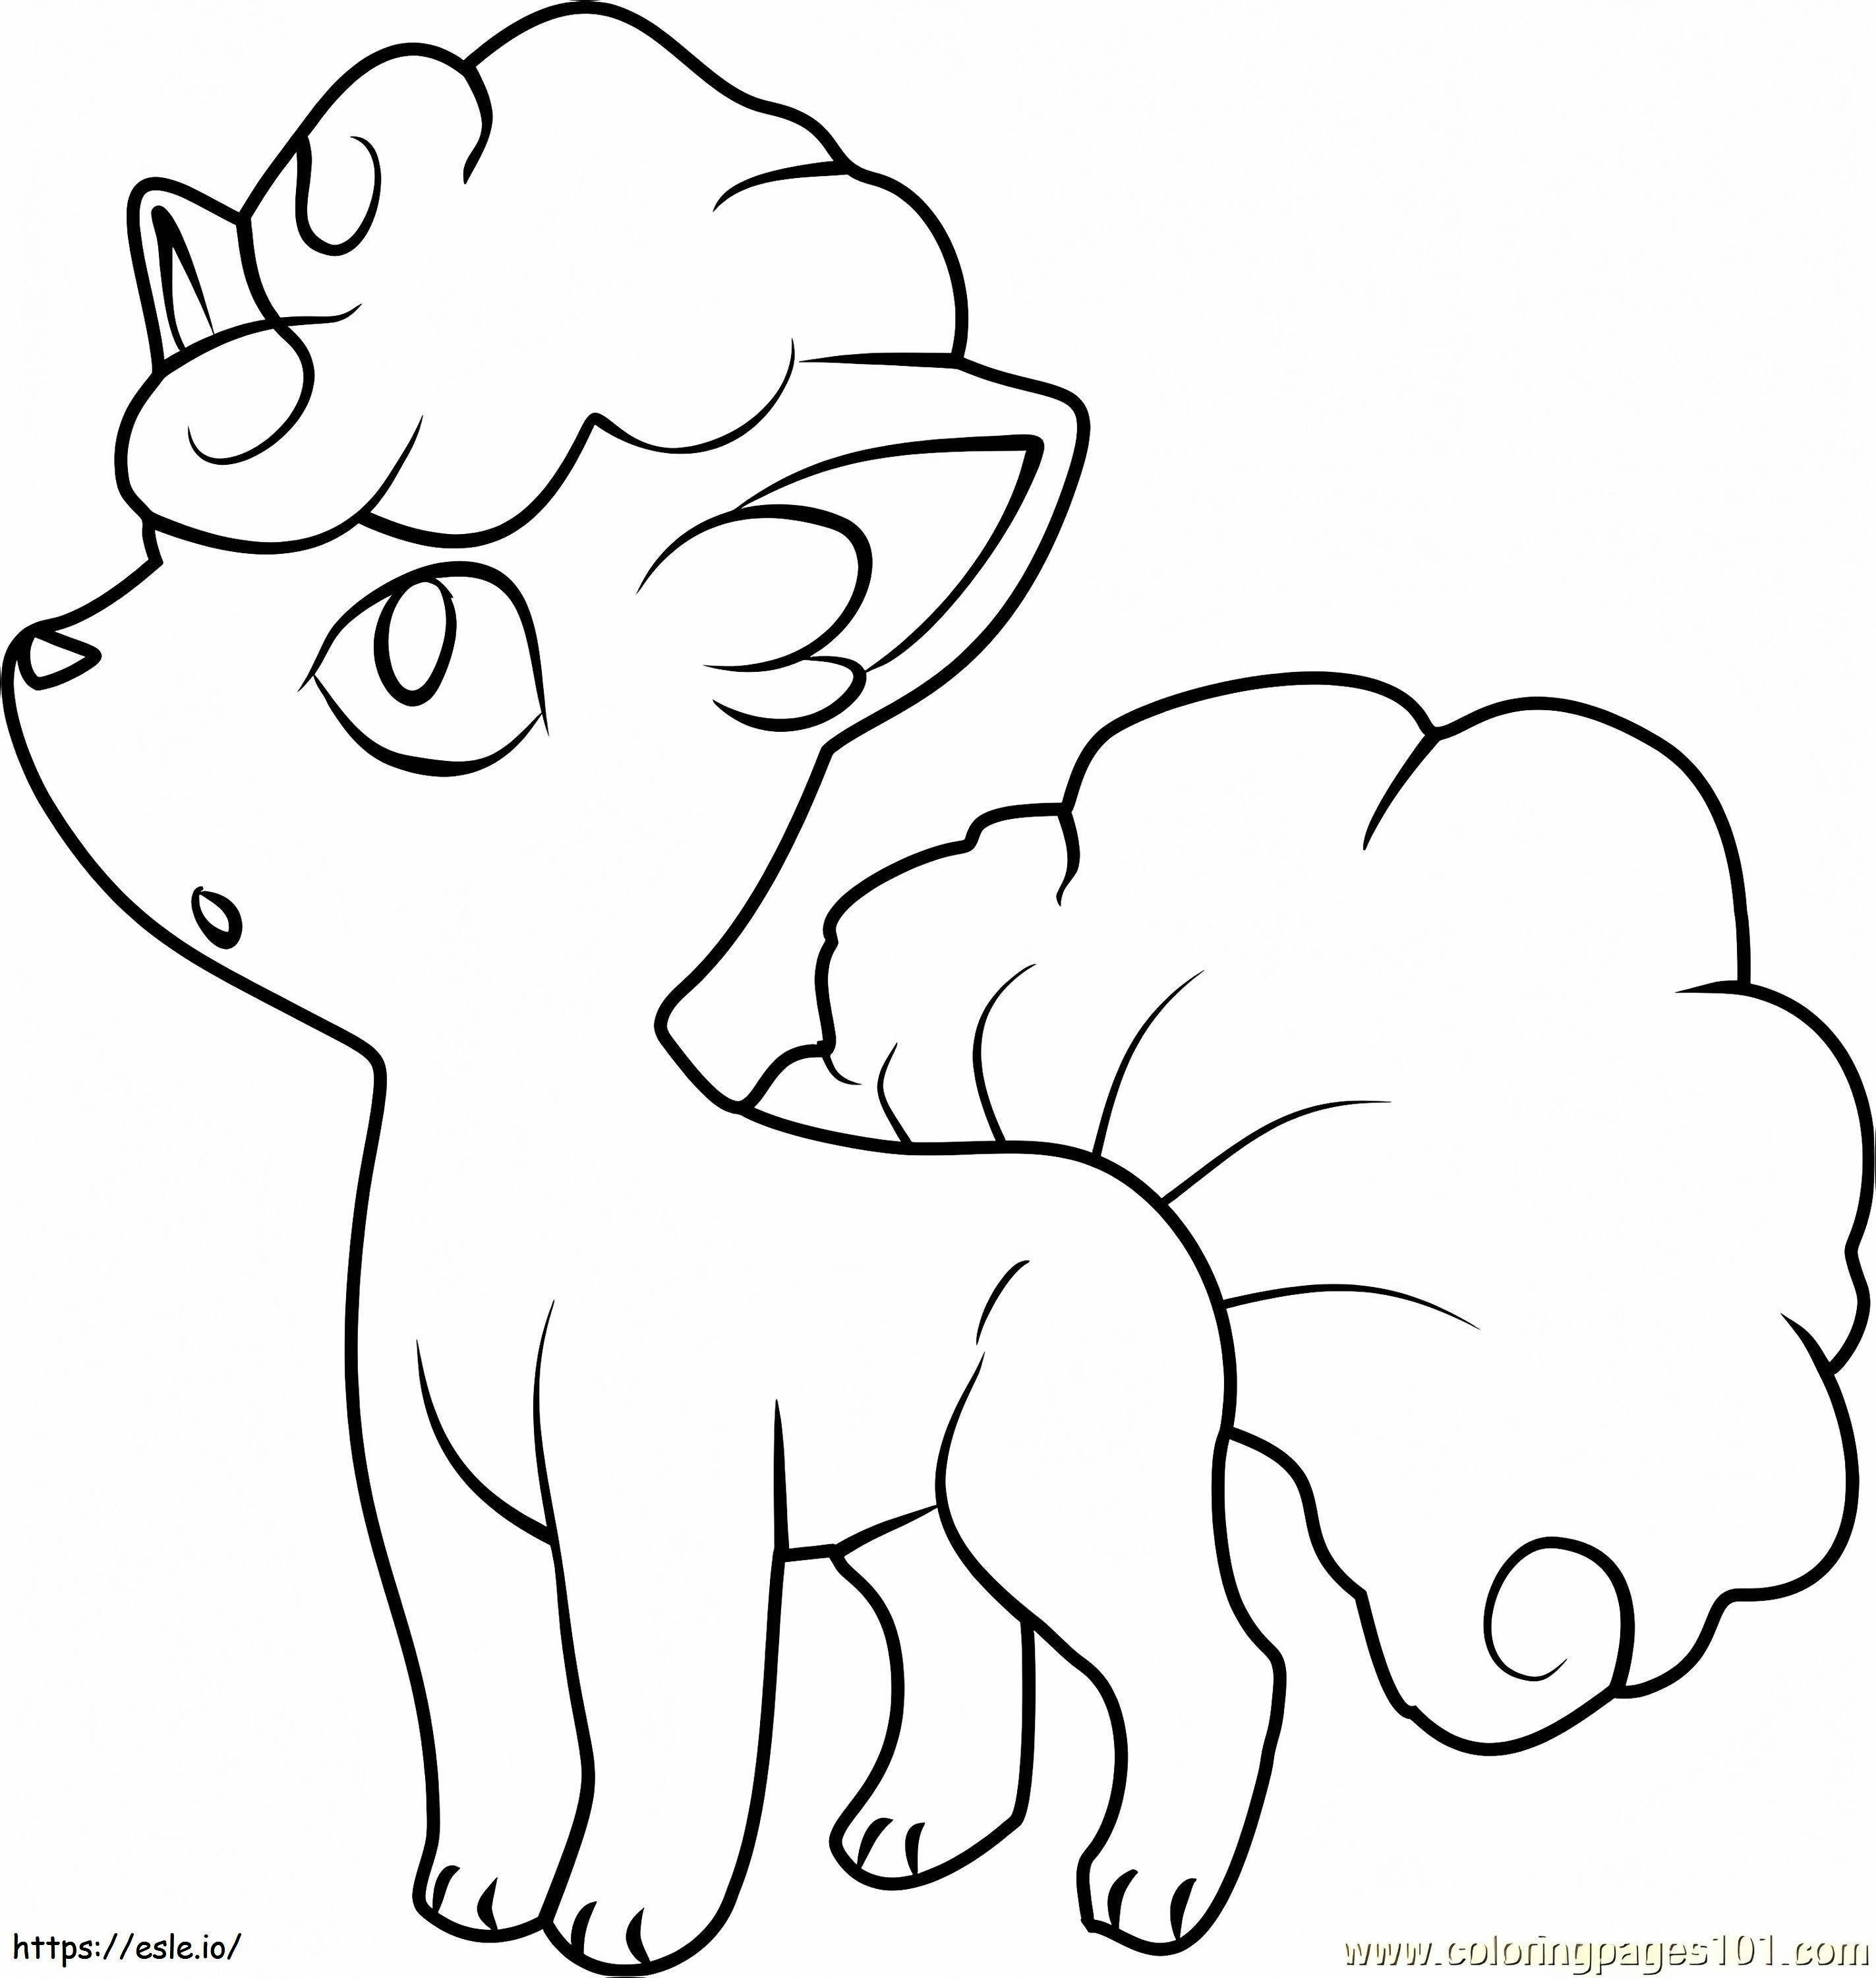 1529552928 16 coloring page